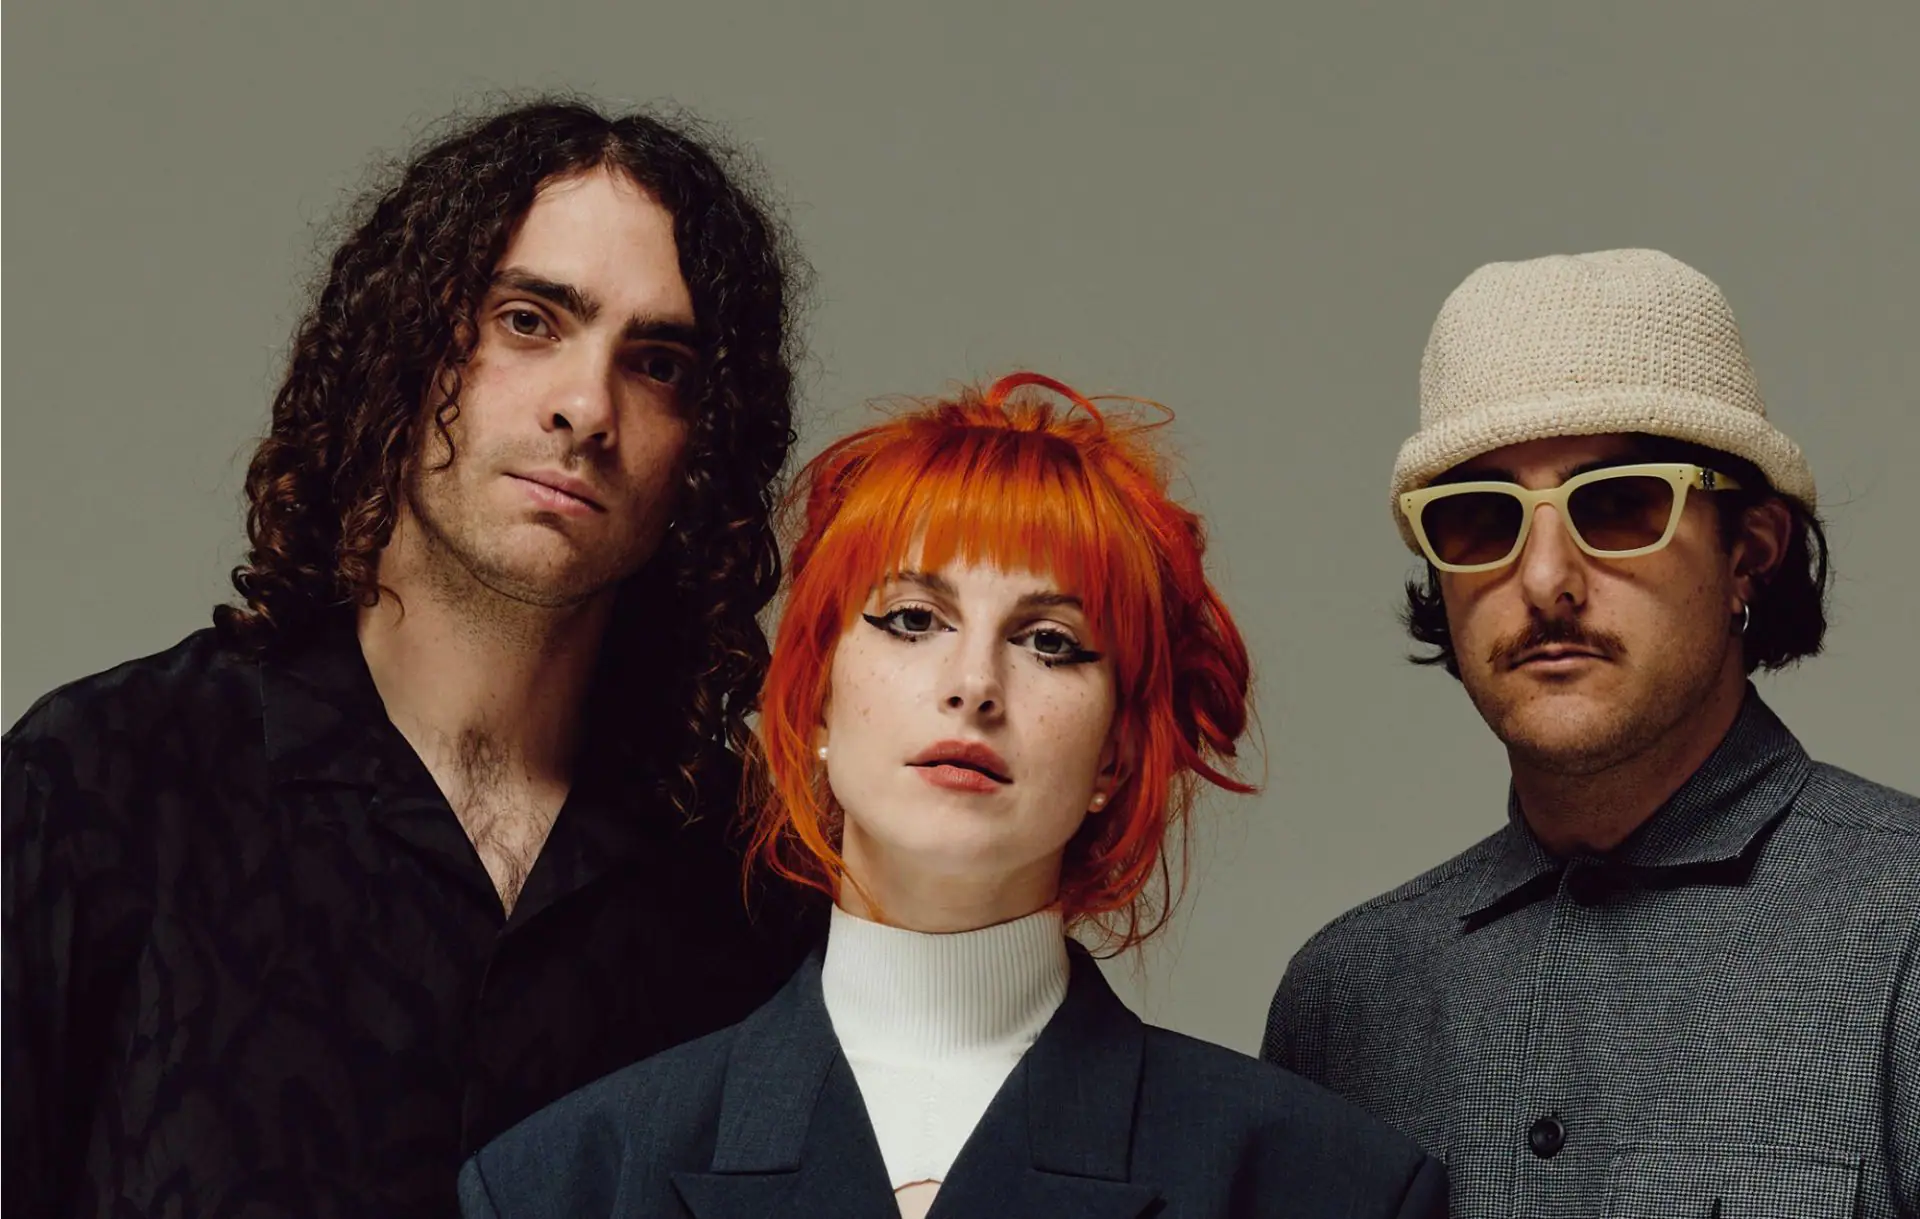 Review: 'This is Why' album provides refreshing experience for Paramore's  return to pop-punk - The Daily Gamecock at University of South Carolina